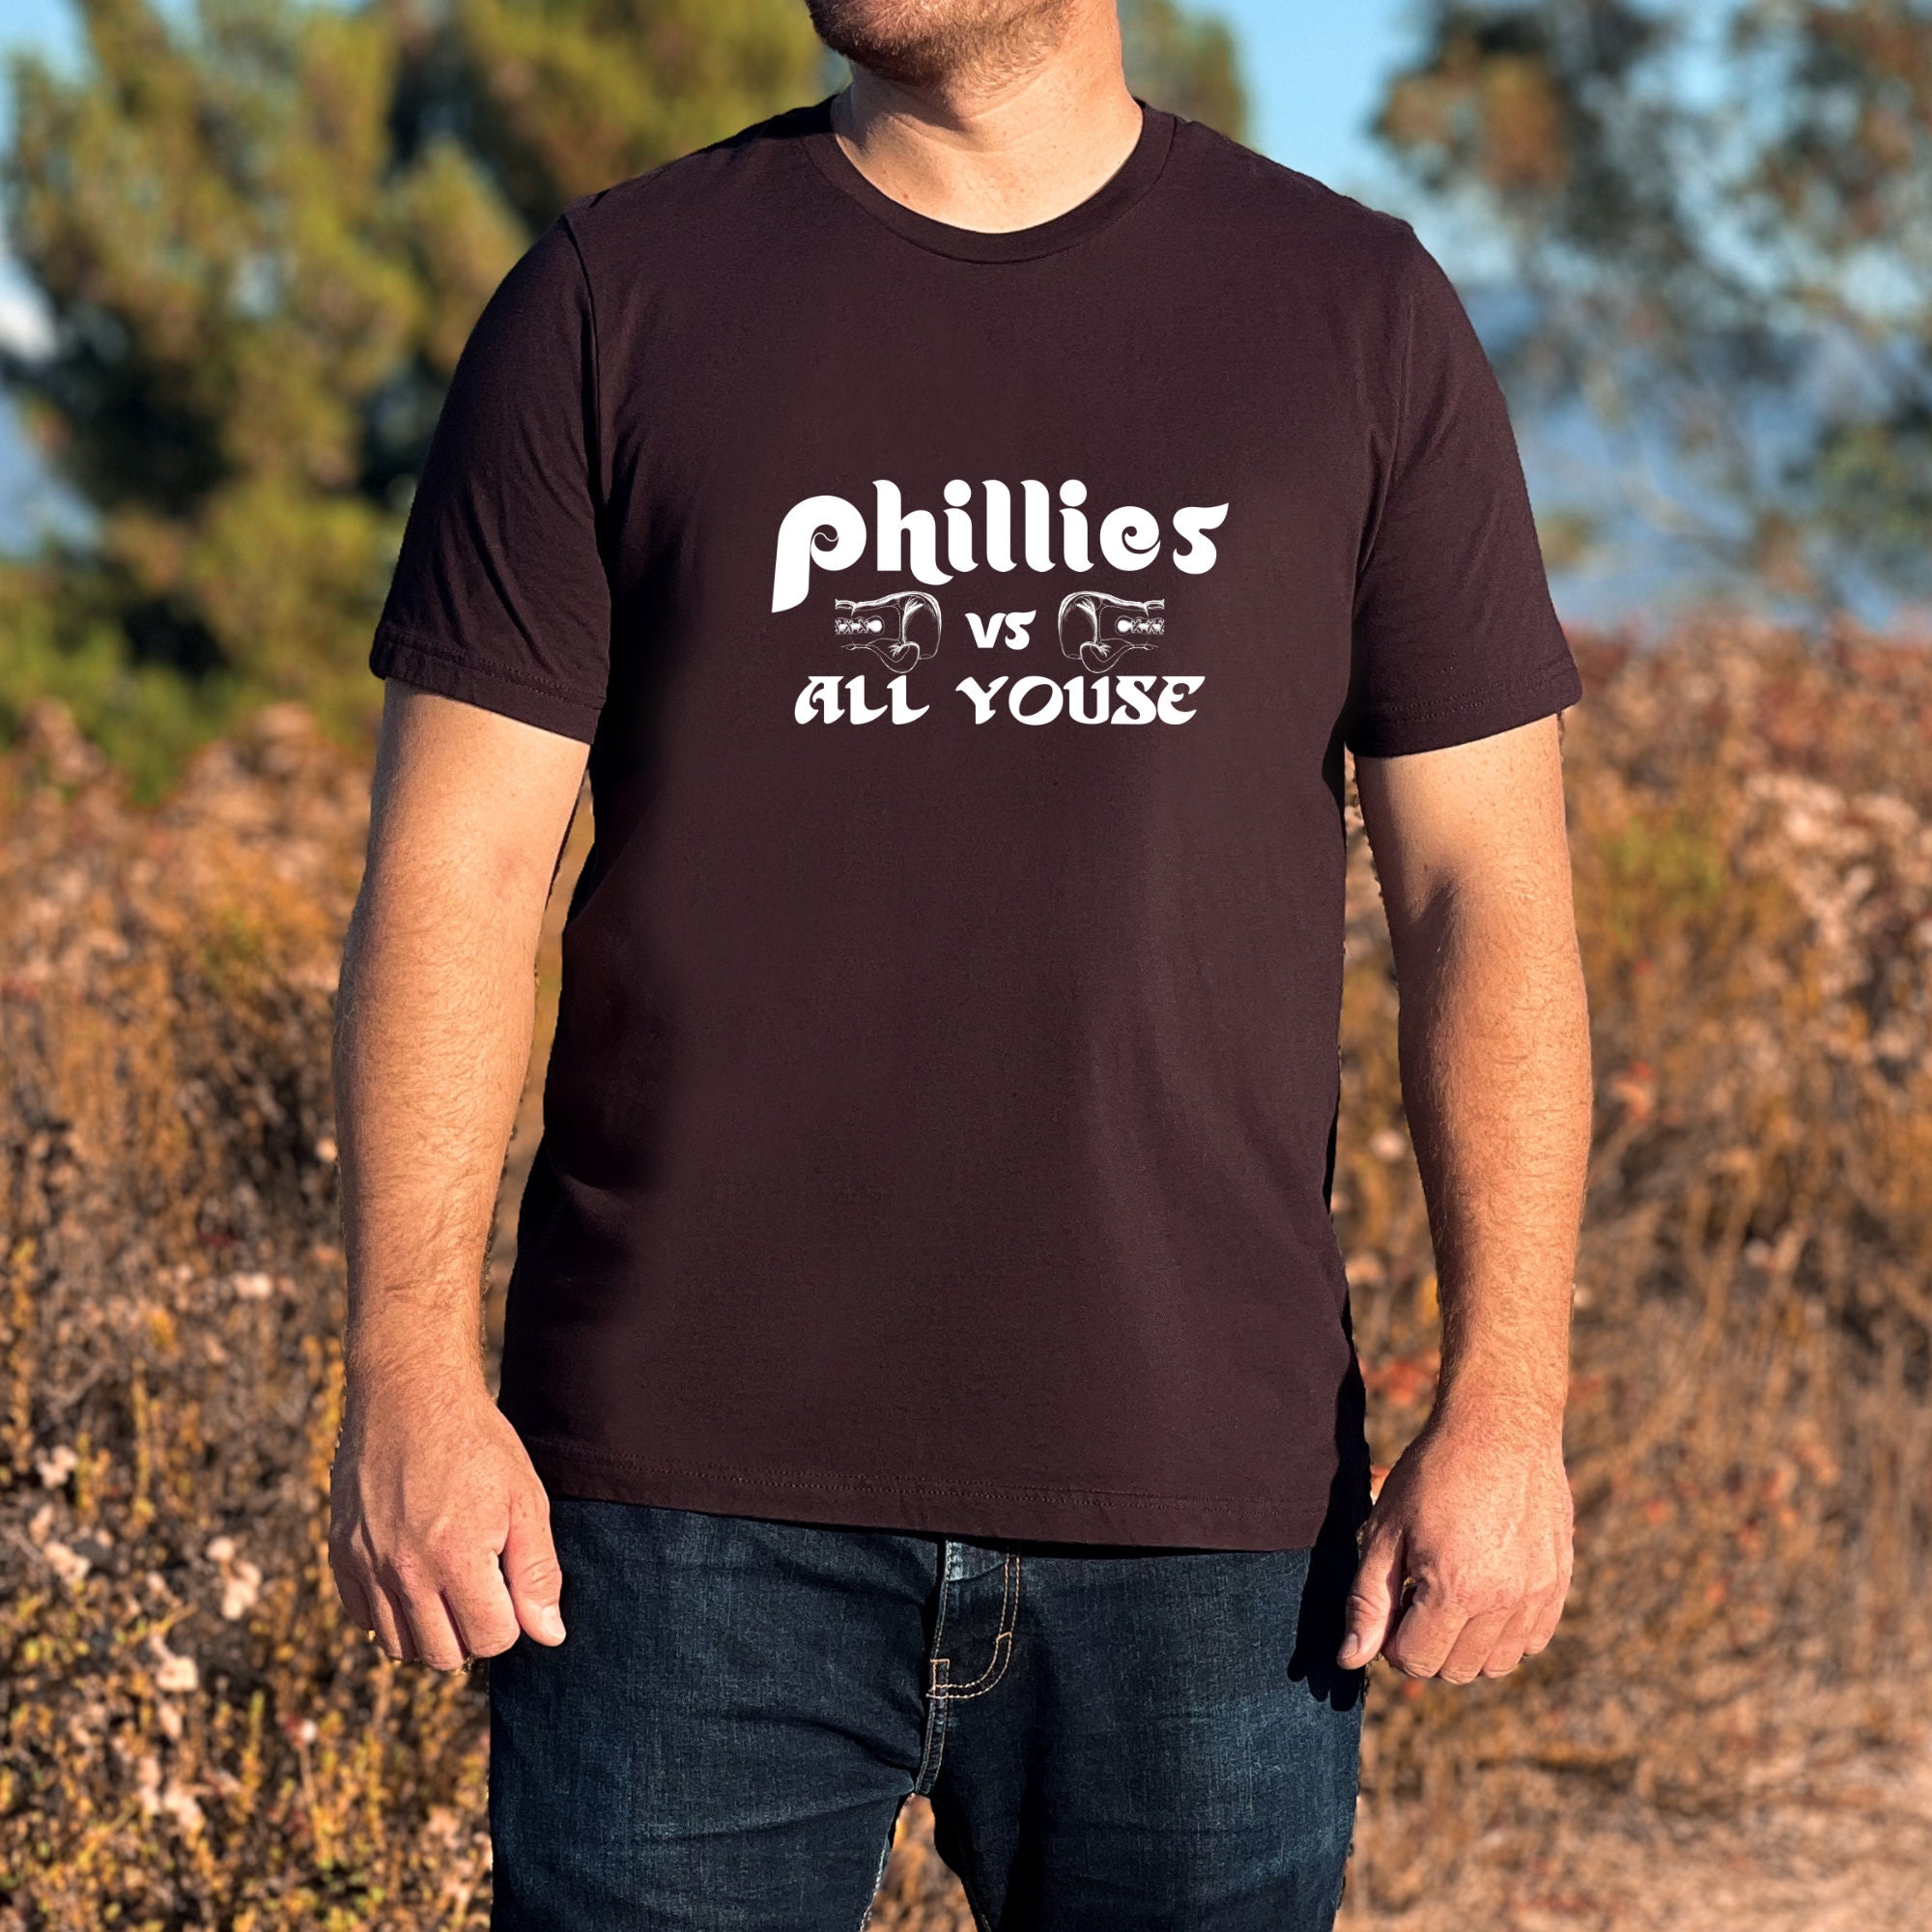 Phillies vs. All youse Phillies Tee, Men's Phillies Shirt, Ring the Bell,  Red October, Philly Humor, Bryce Harper, World Series